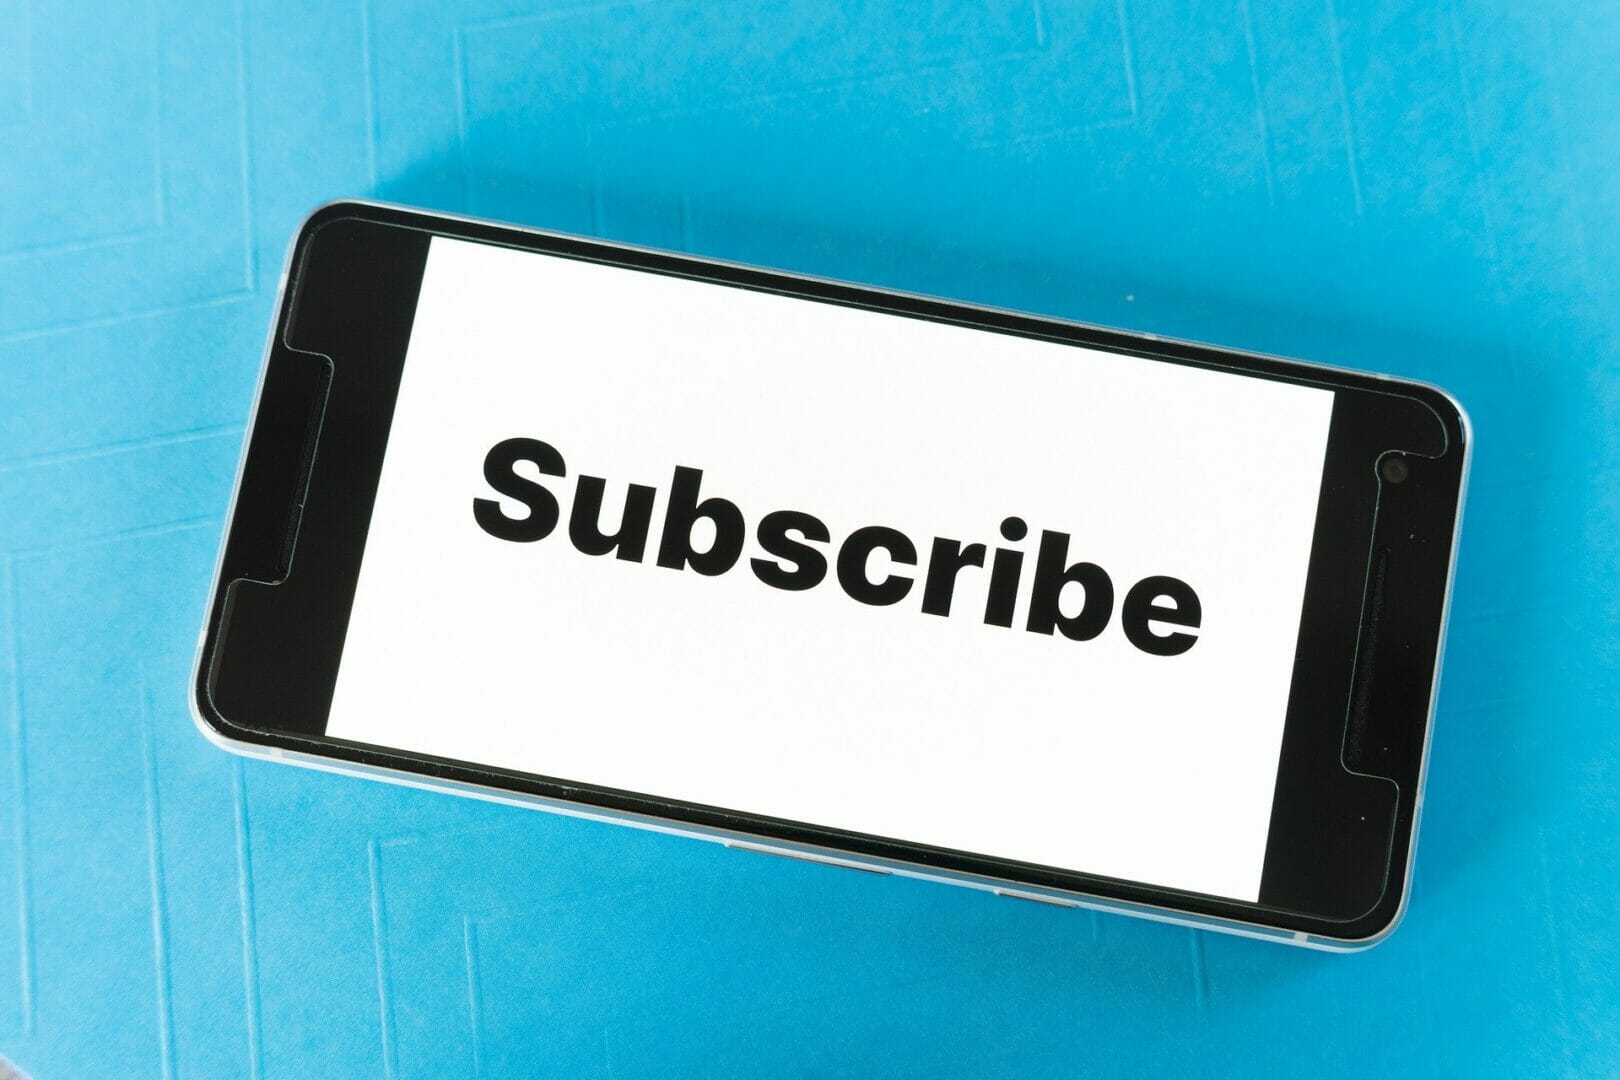 How Much Would a Fully Subscribed Life Would Cost?